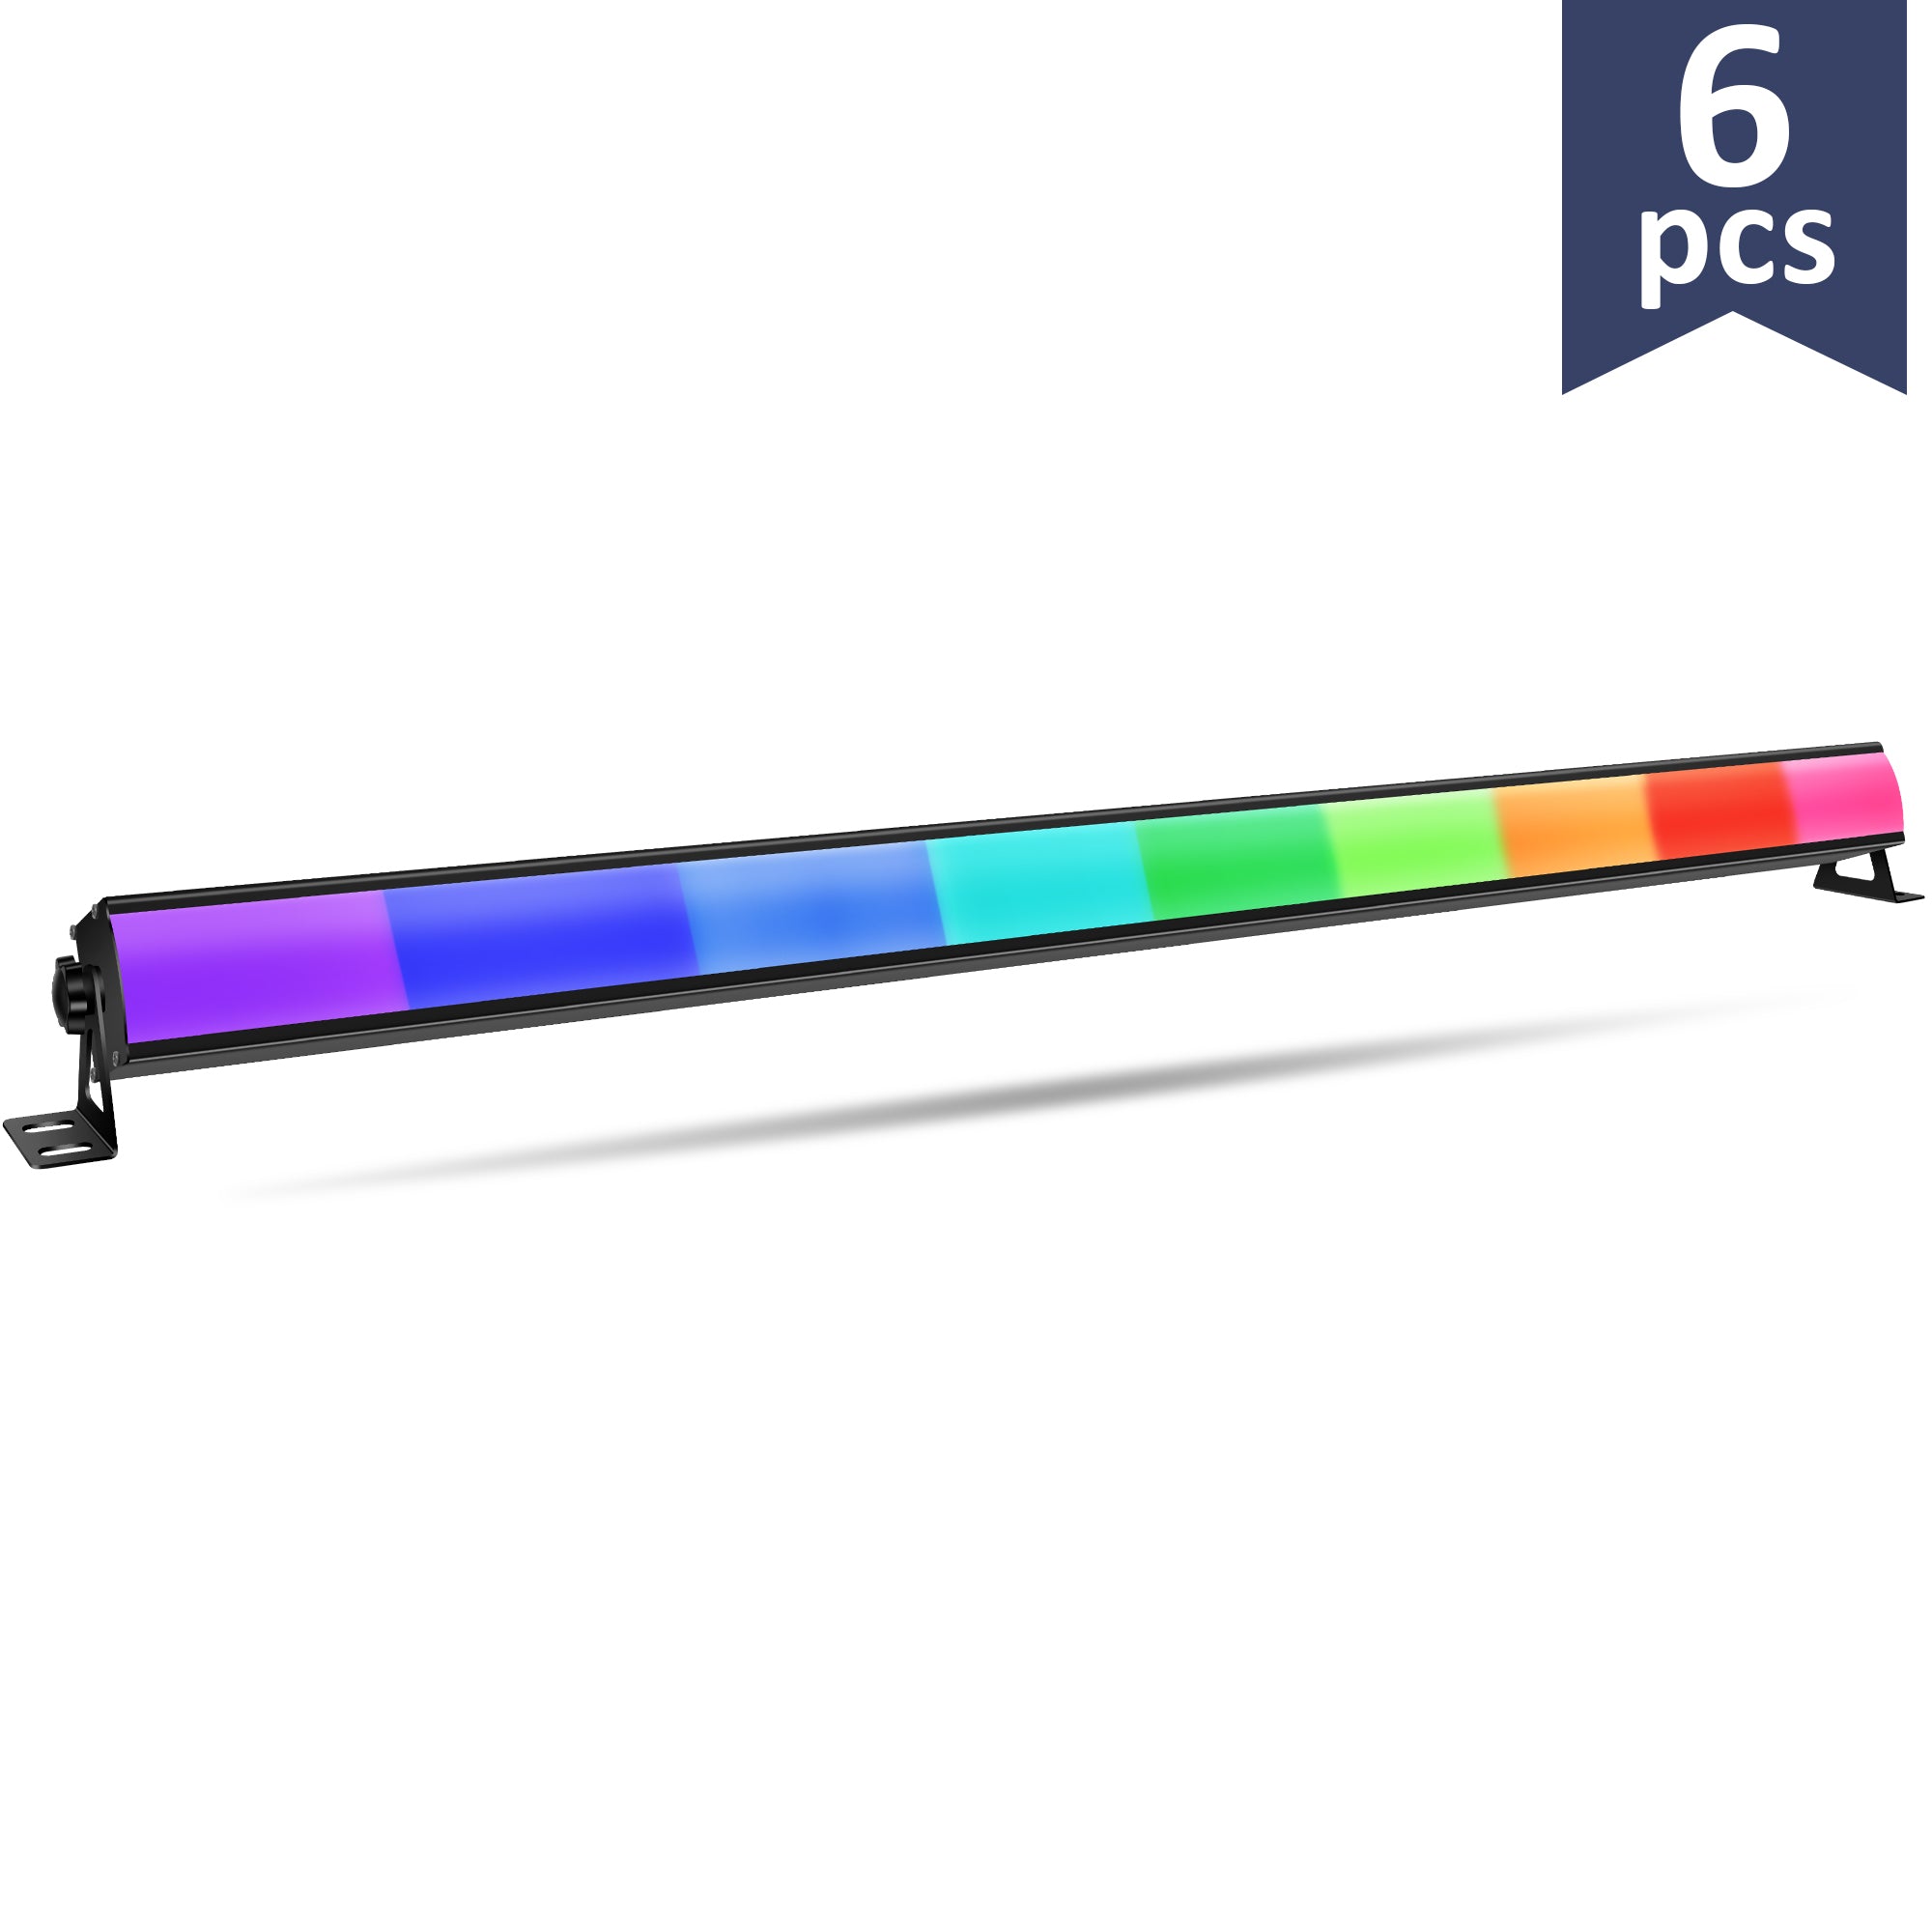 LED Pixel Light Bar - 224LED, RGB 3n1, Frosted Cover